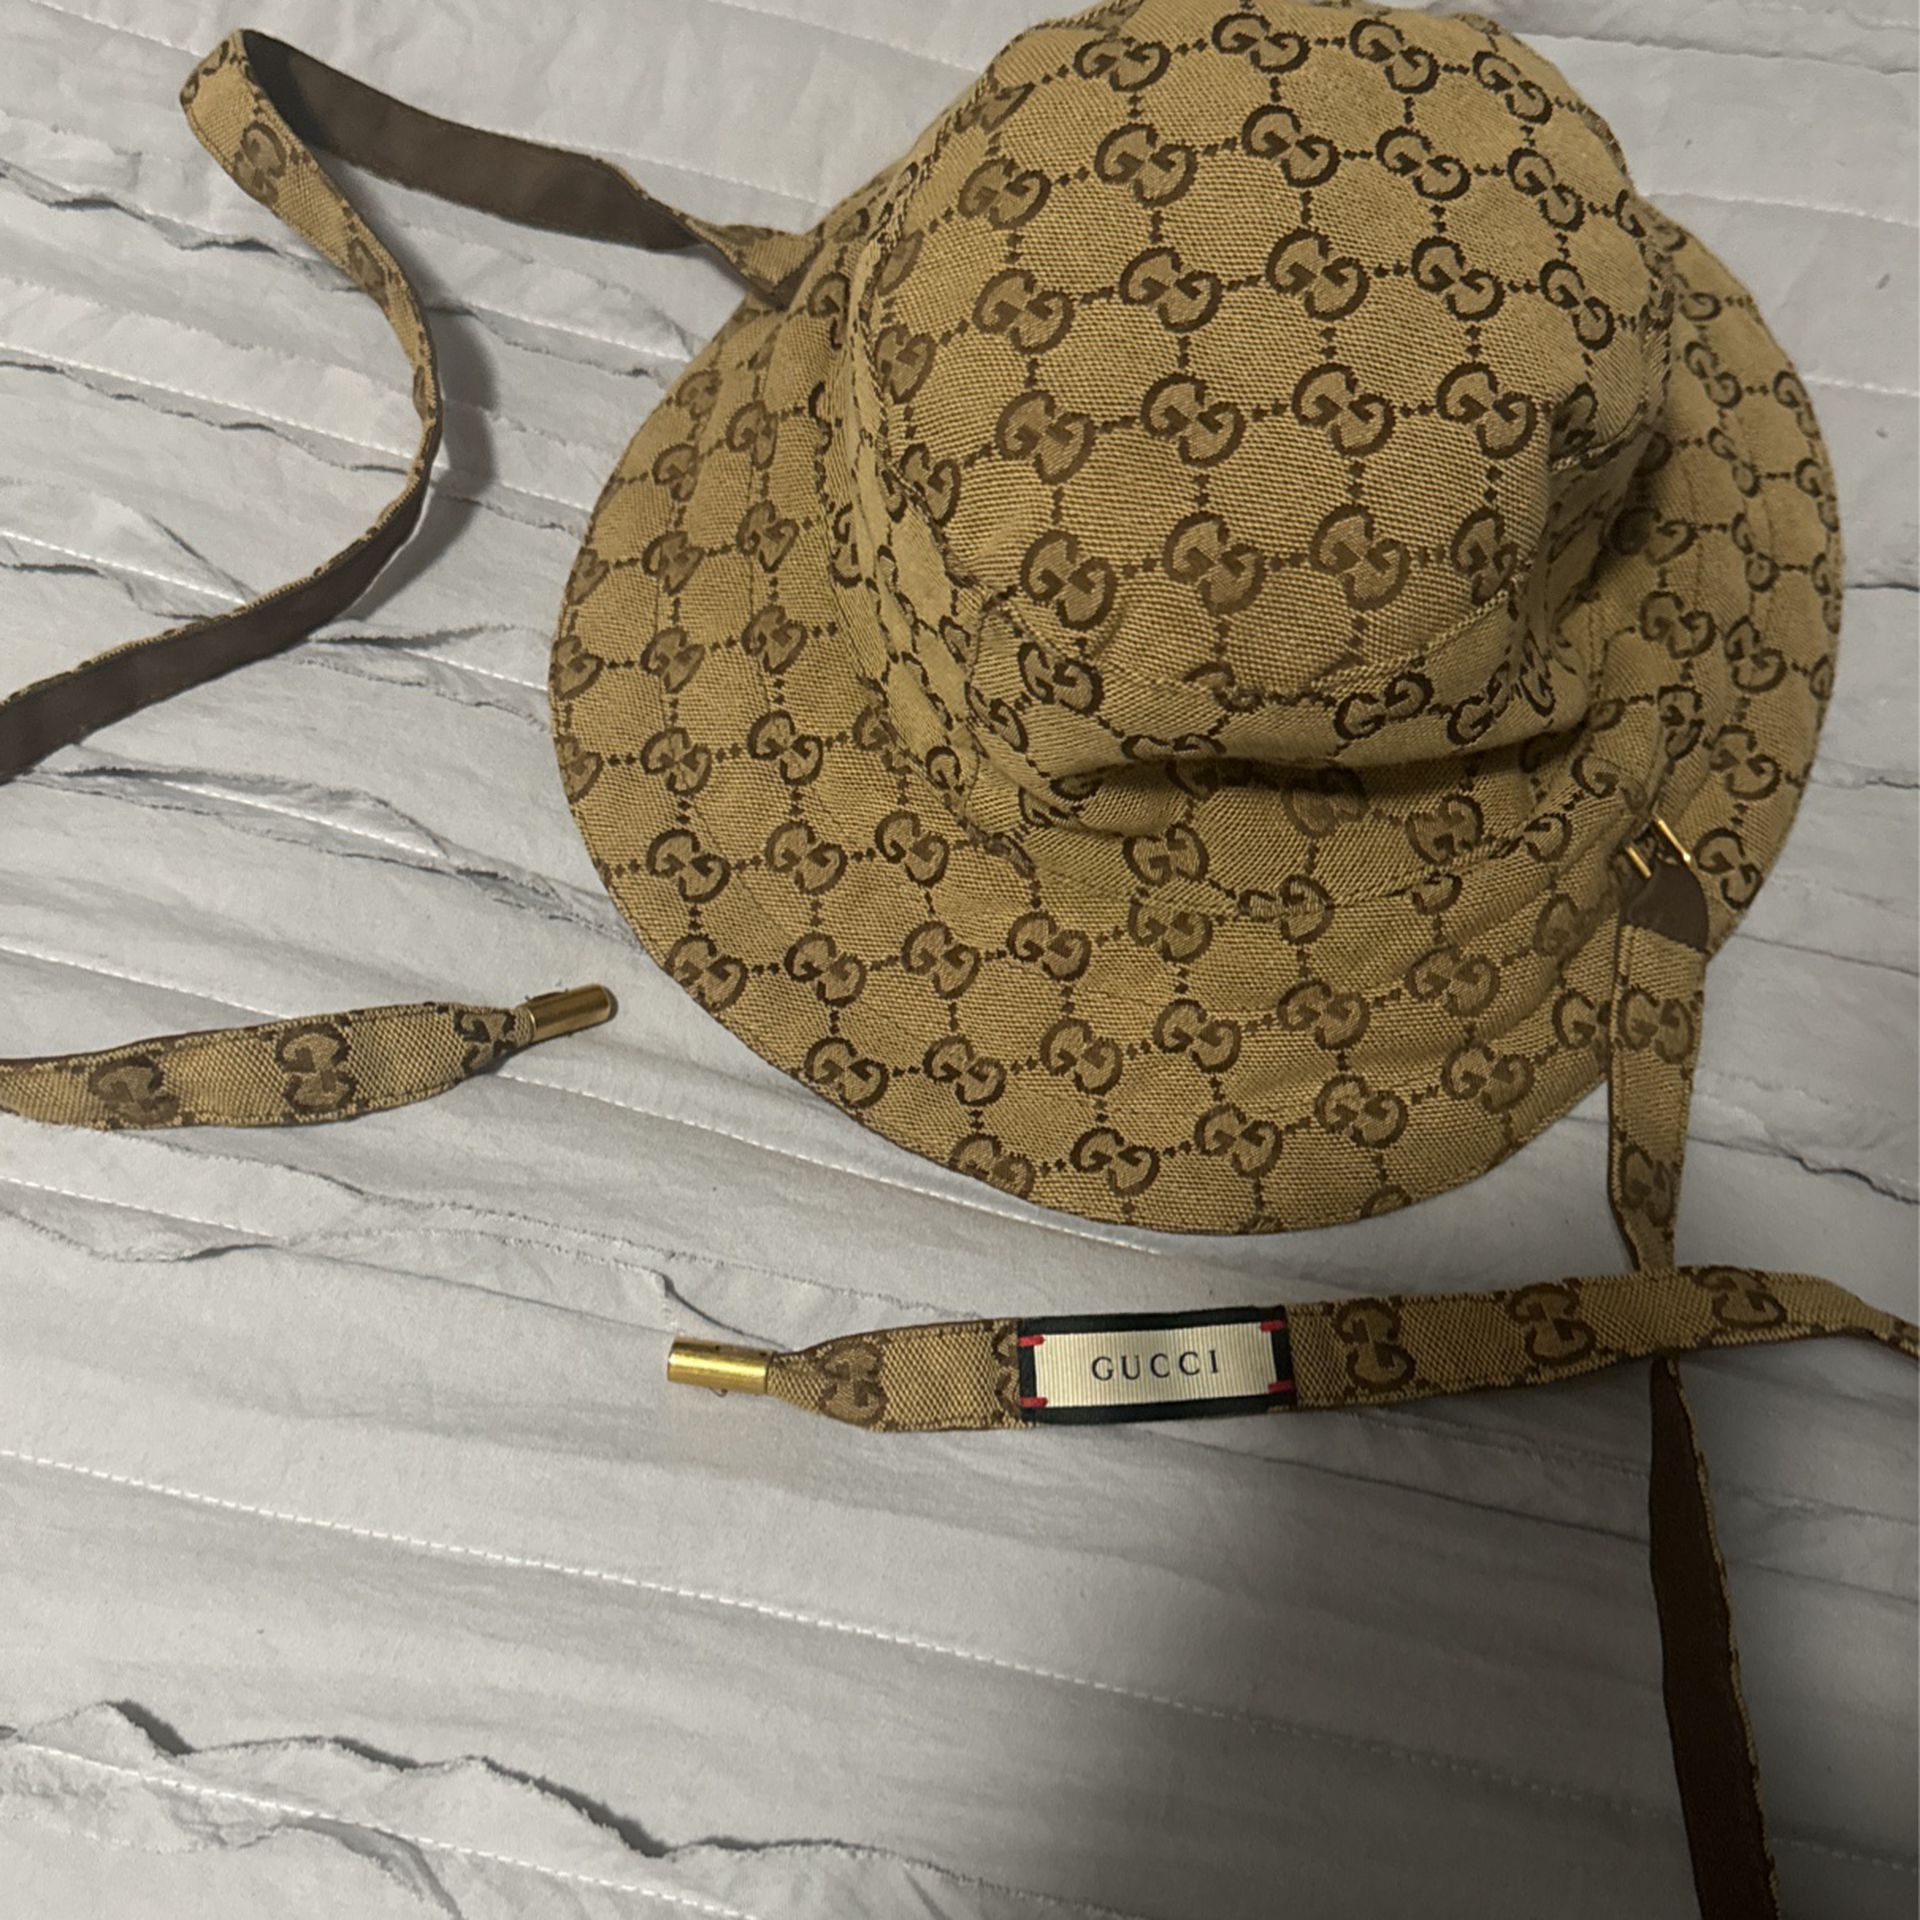 Authentic Gucci Bucket 